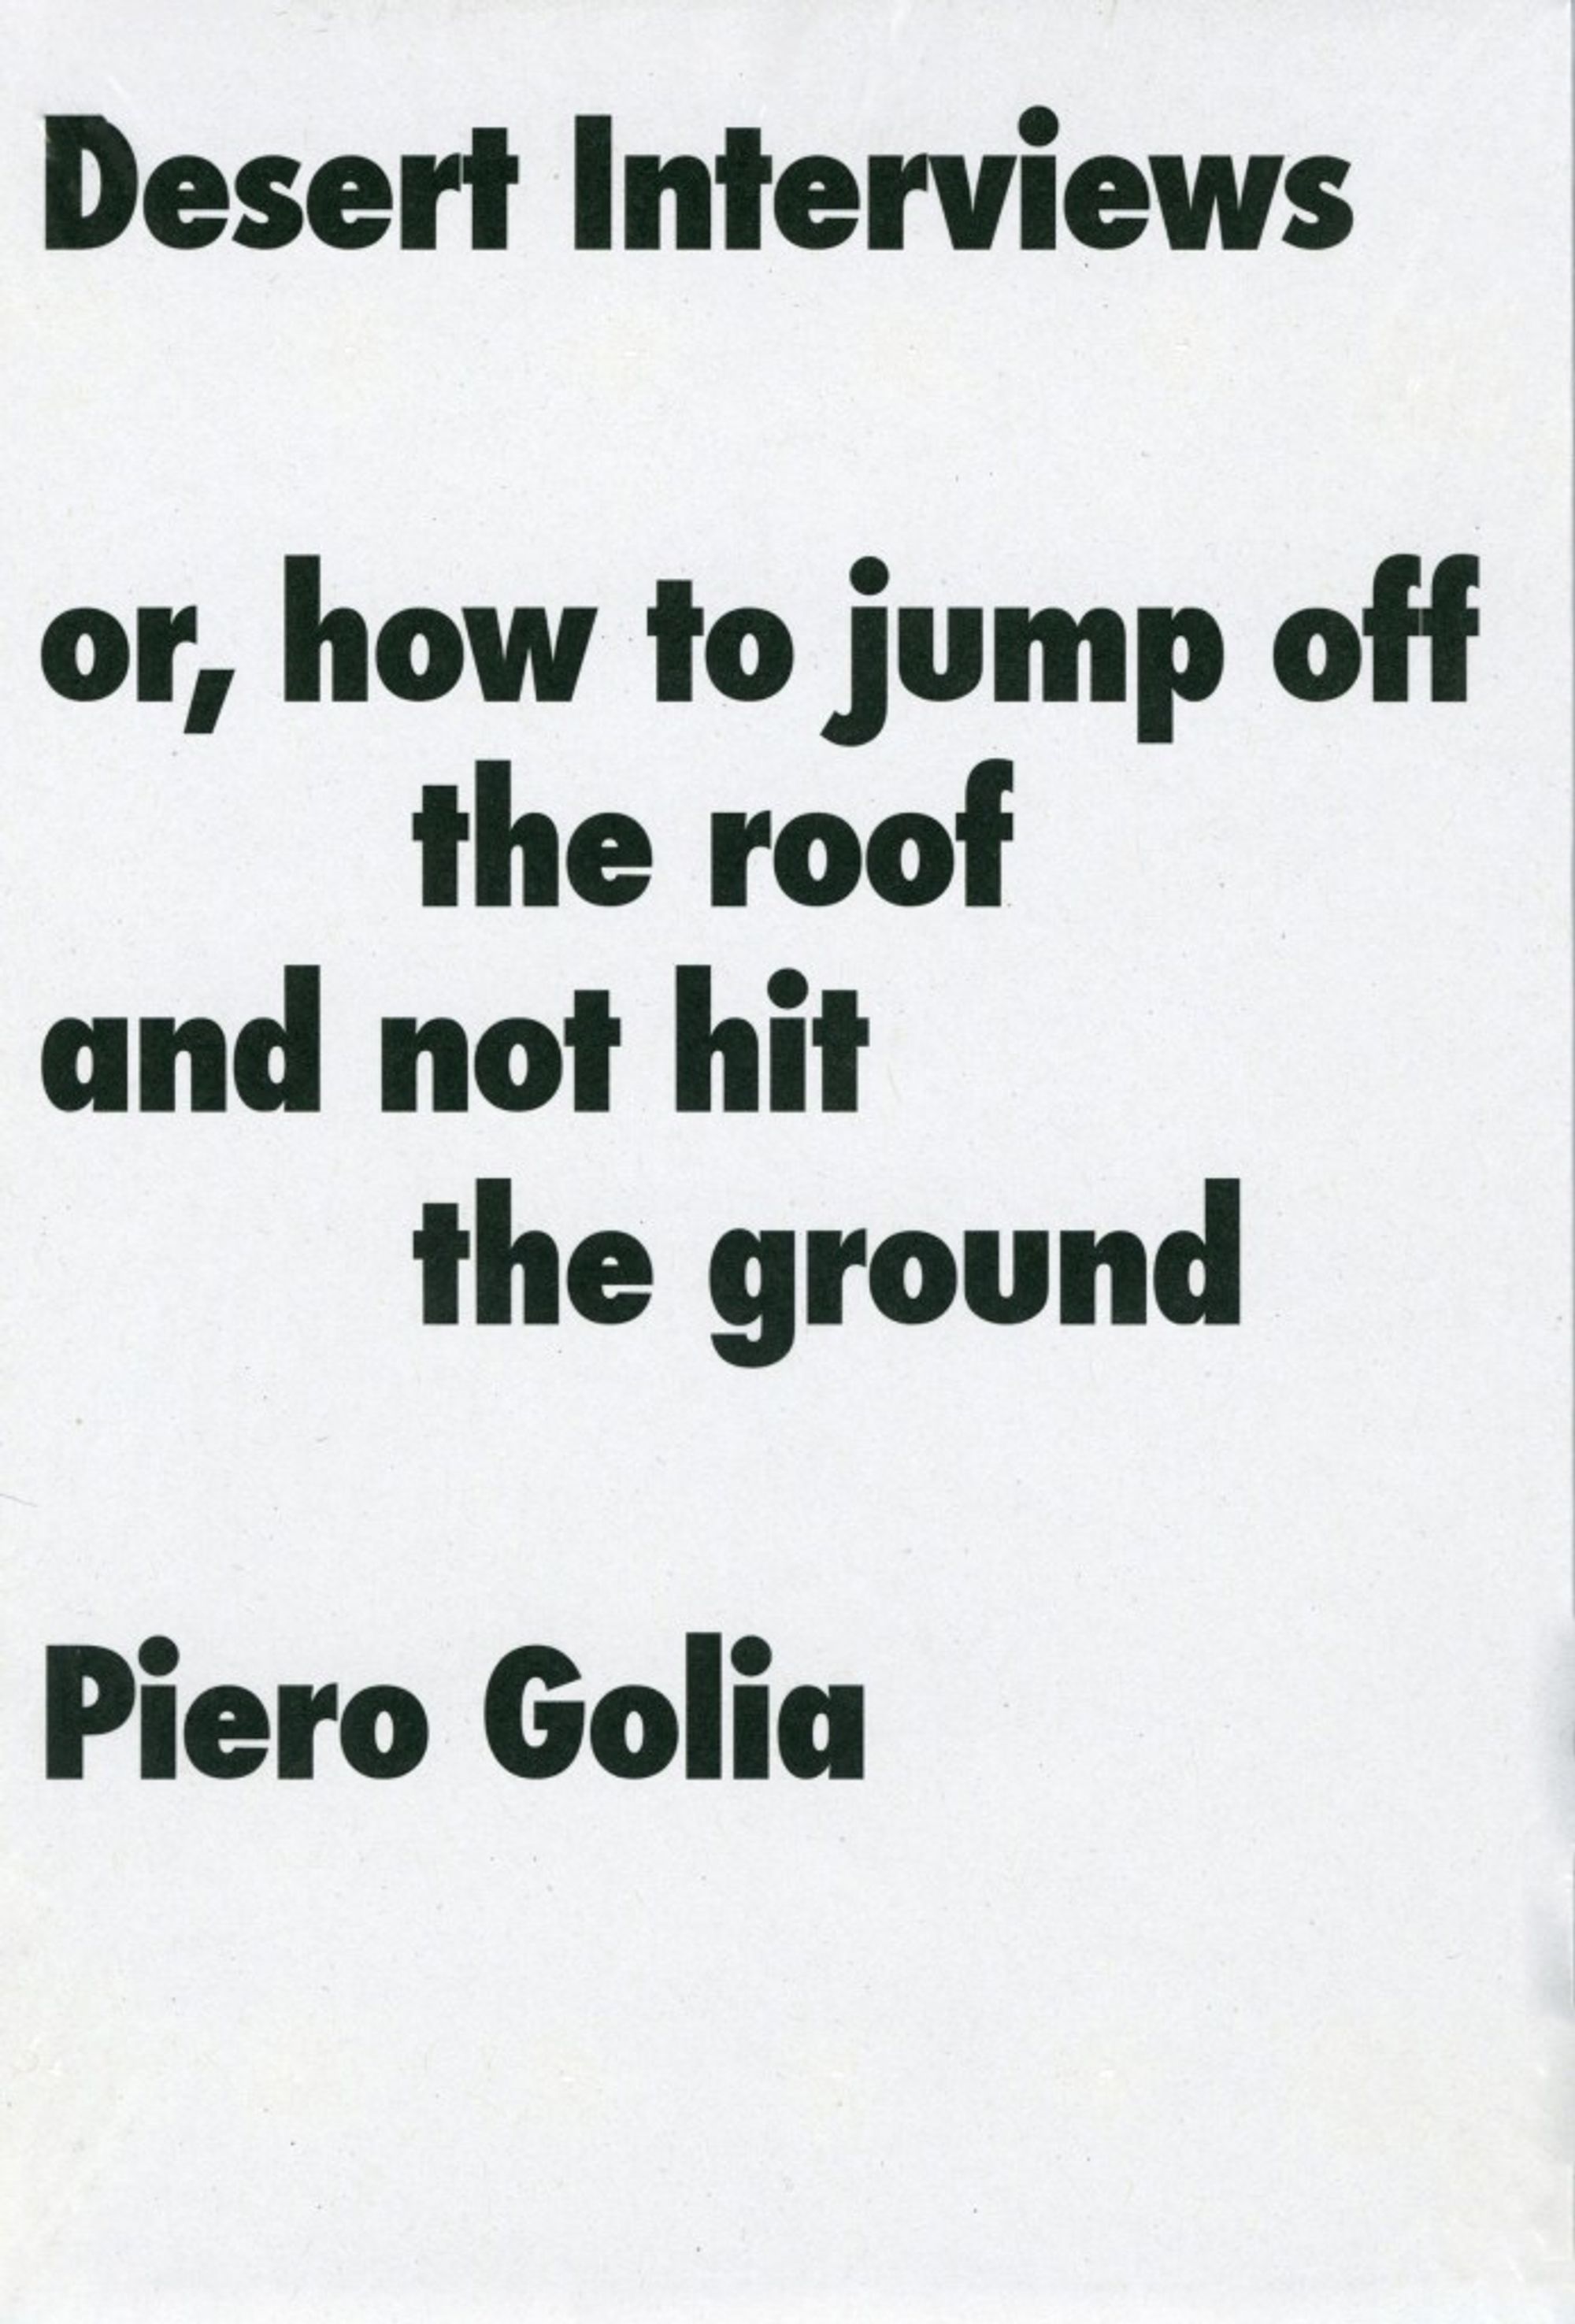 Detail view of Piero Golia: Desert Interviews or, how to jump off the roof and not hit the ground against a plain gray background